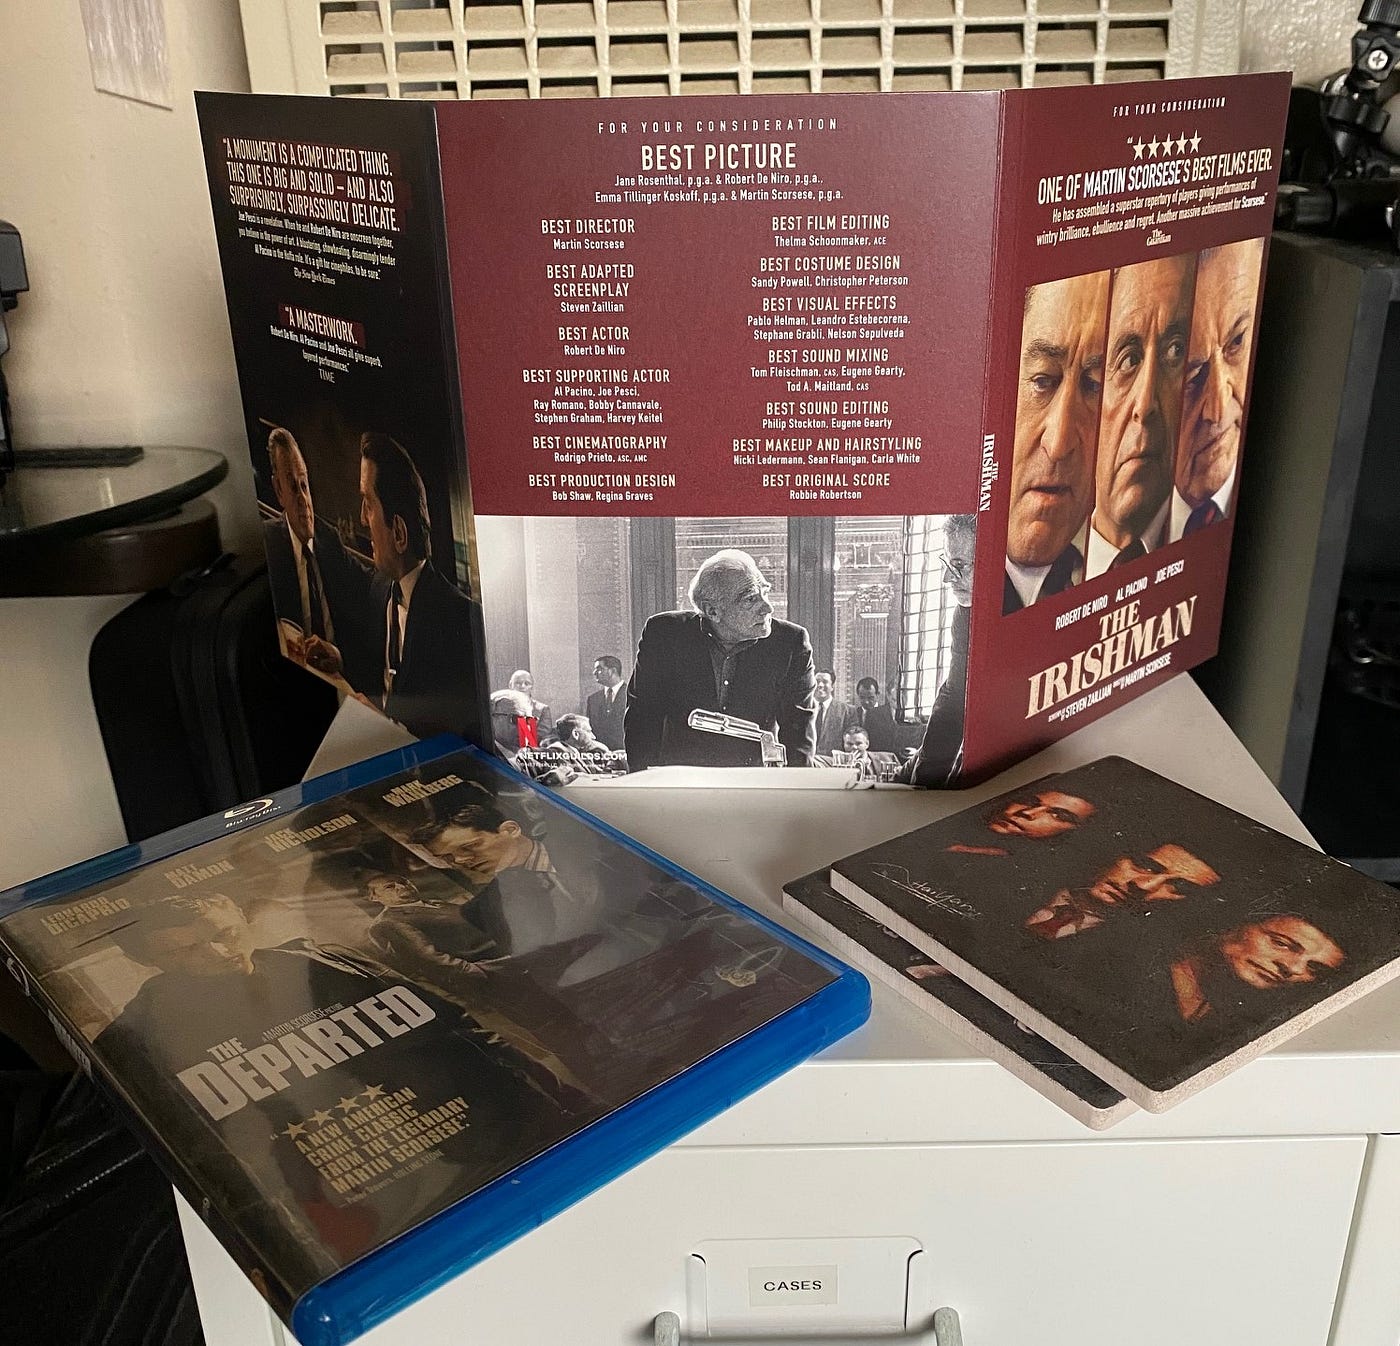 The Irishman Criterion. Criterion's The Irishman Bluray (out… | by Kevin  Kunze | Medium